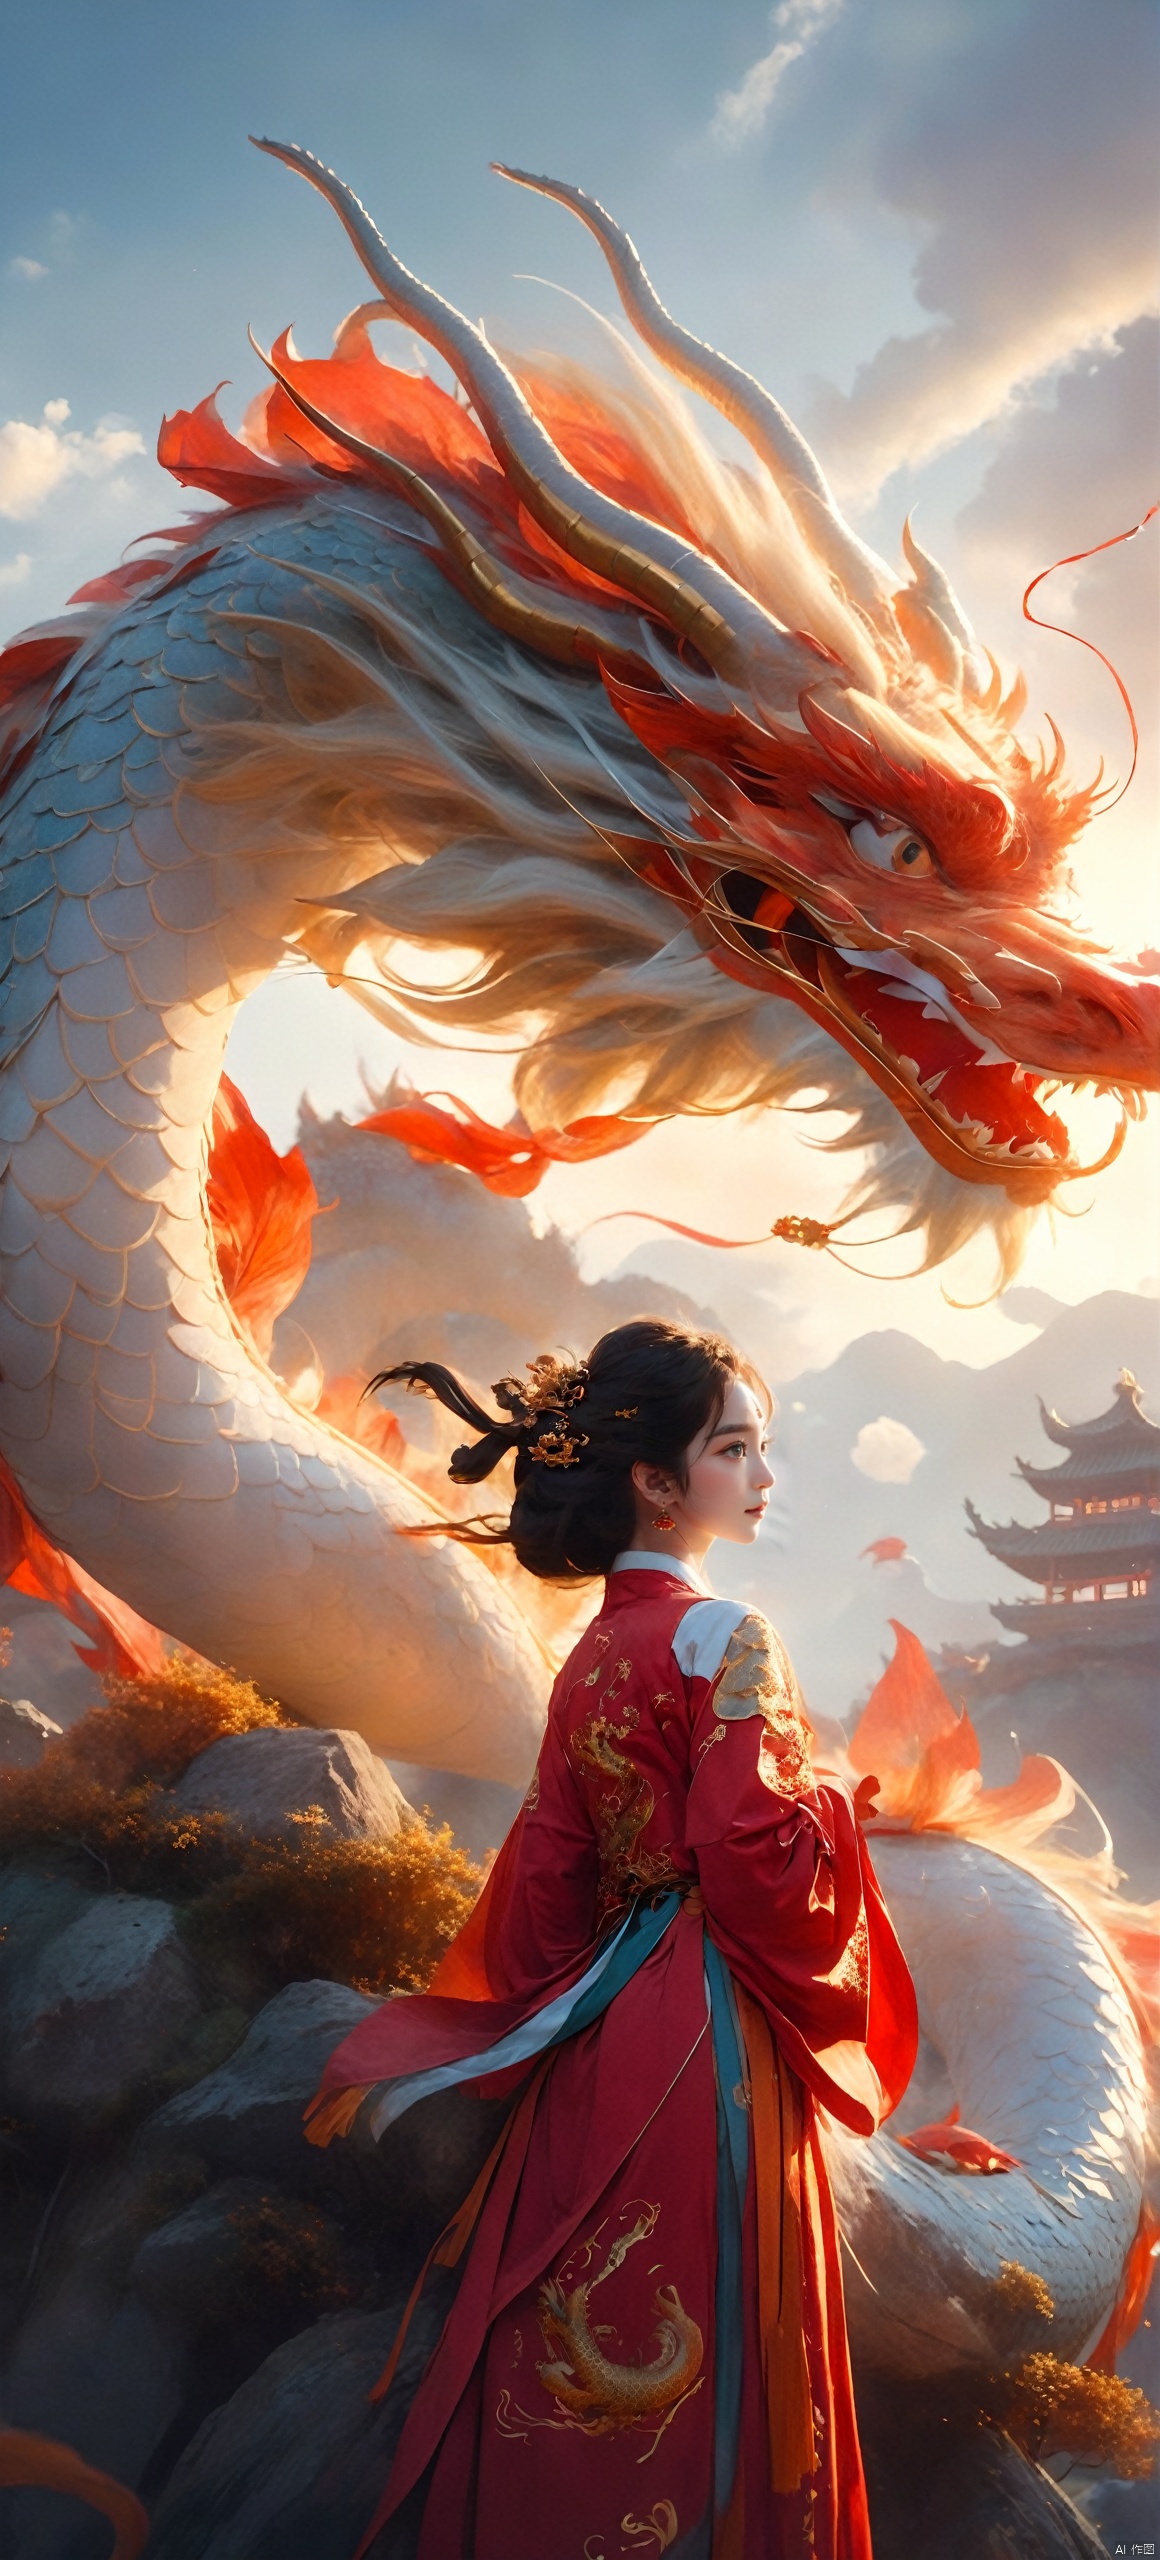  The girl and the Chinese dragon,Chinese dragon,1girl,Dragon Claw,Chinese Hanfu,cloud,squama ,The hair on the faucet,Ultimate details,Dragon horn,The graceful and winding dragon body,cloudy sky,dragon,dragon horns,eastern dragon,Open the dragon's mouth,The girl stands on the dragon's body, with a back and a metal decorative object behind her,Close range,Red Dragon,evening,gradient sky,The camera looks up from below,horns,long hair,mountain,open mouth,orange eyes,outdoors,scales,sky,smoke,solo,sun,sunset,teeth,twilight, Chinese dragon, glow